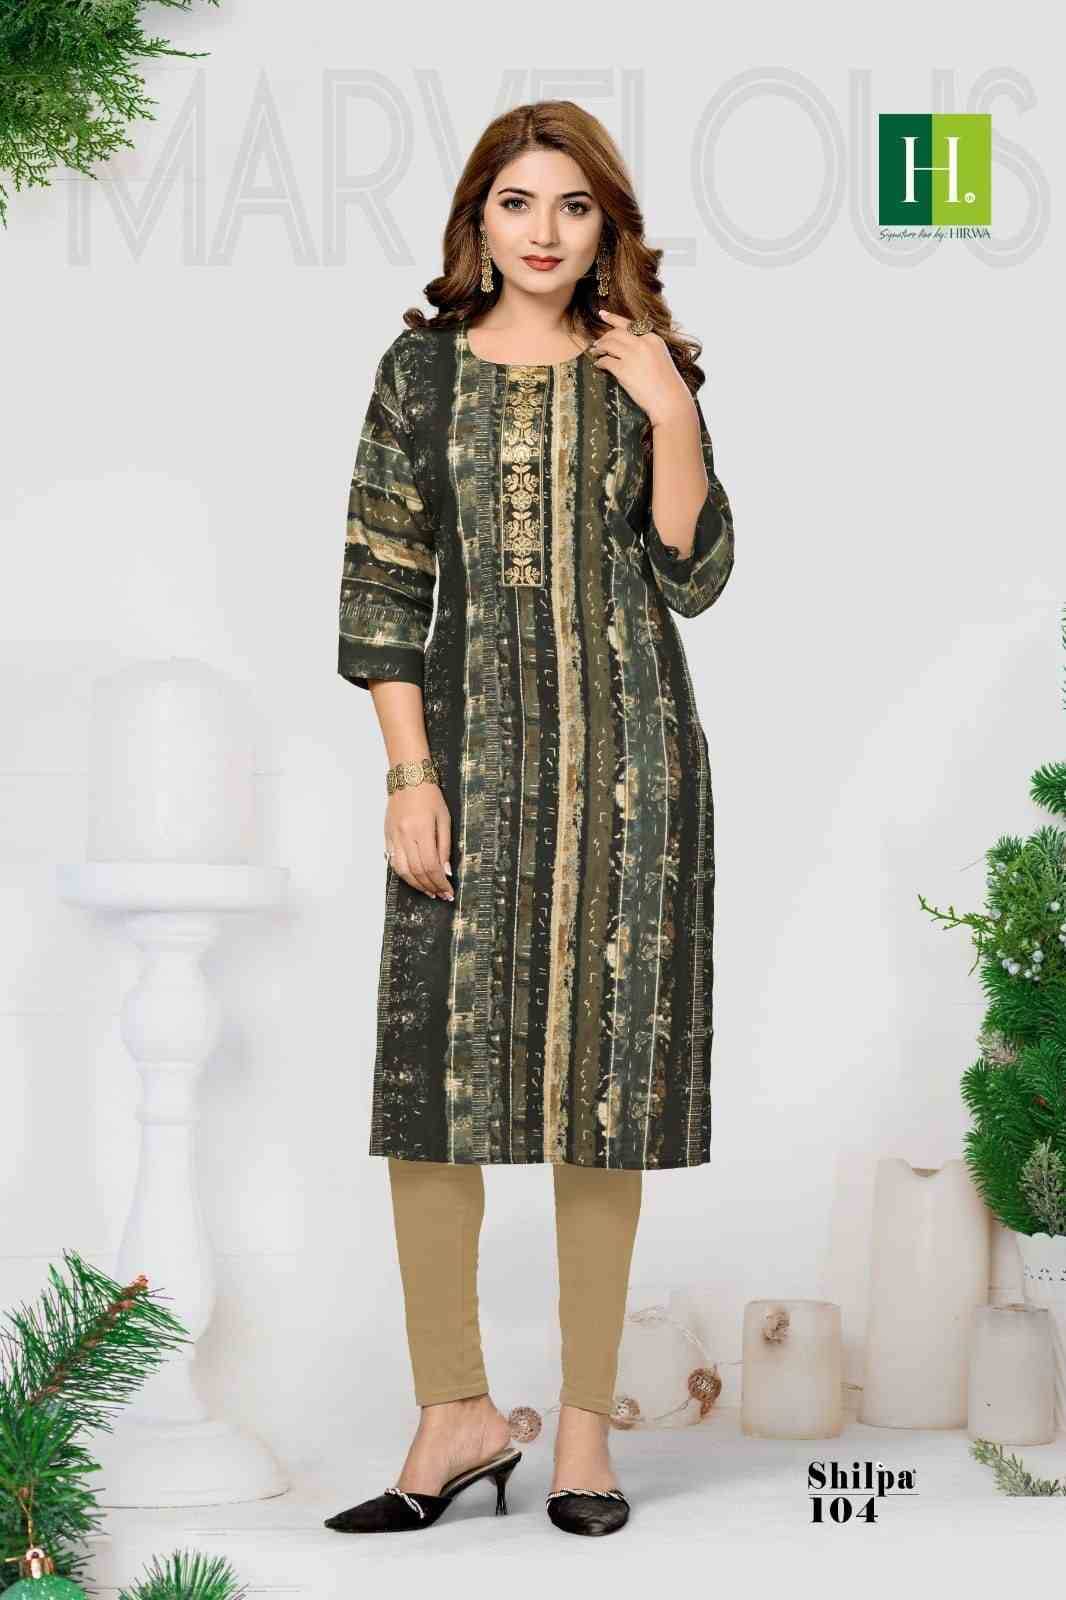 Shilpa By Hirwa 101 To 104 Series Designer Stylish Fancy Colorful Beautiful Party Wear & Ethnic Wear Collection Rayon Foil Kurtis At Wholesale Price